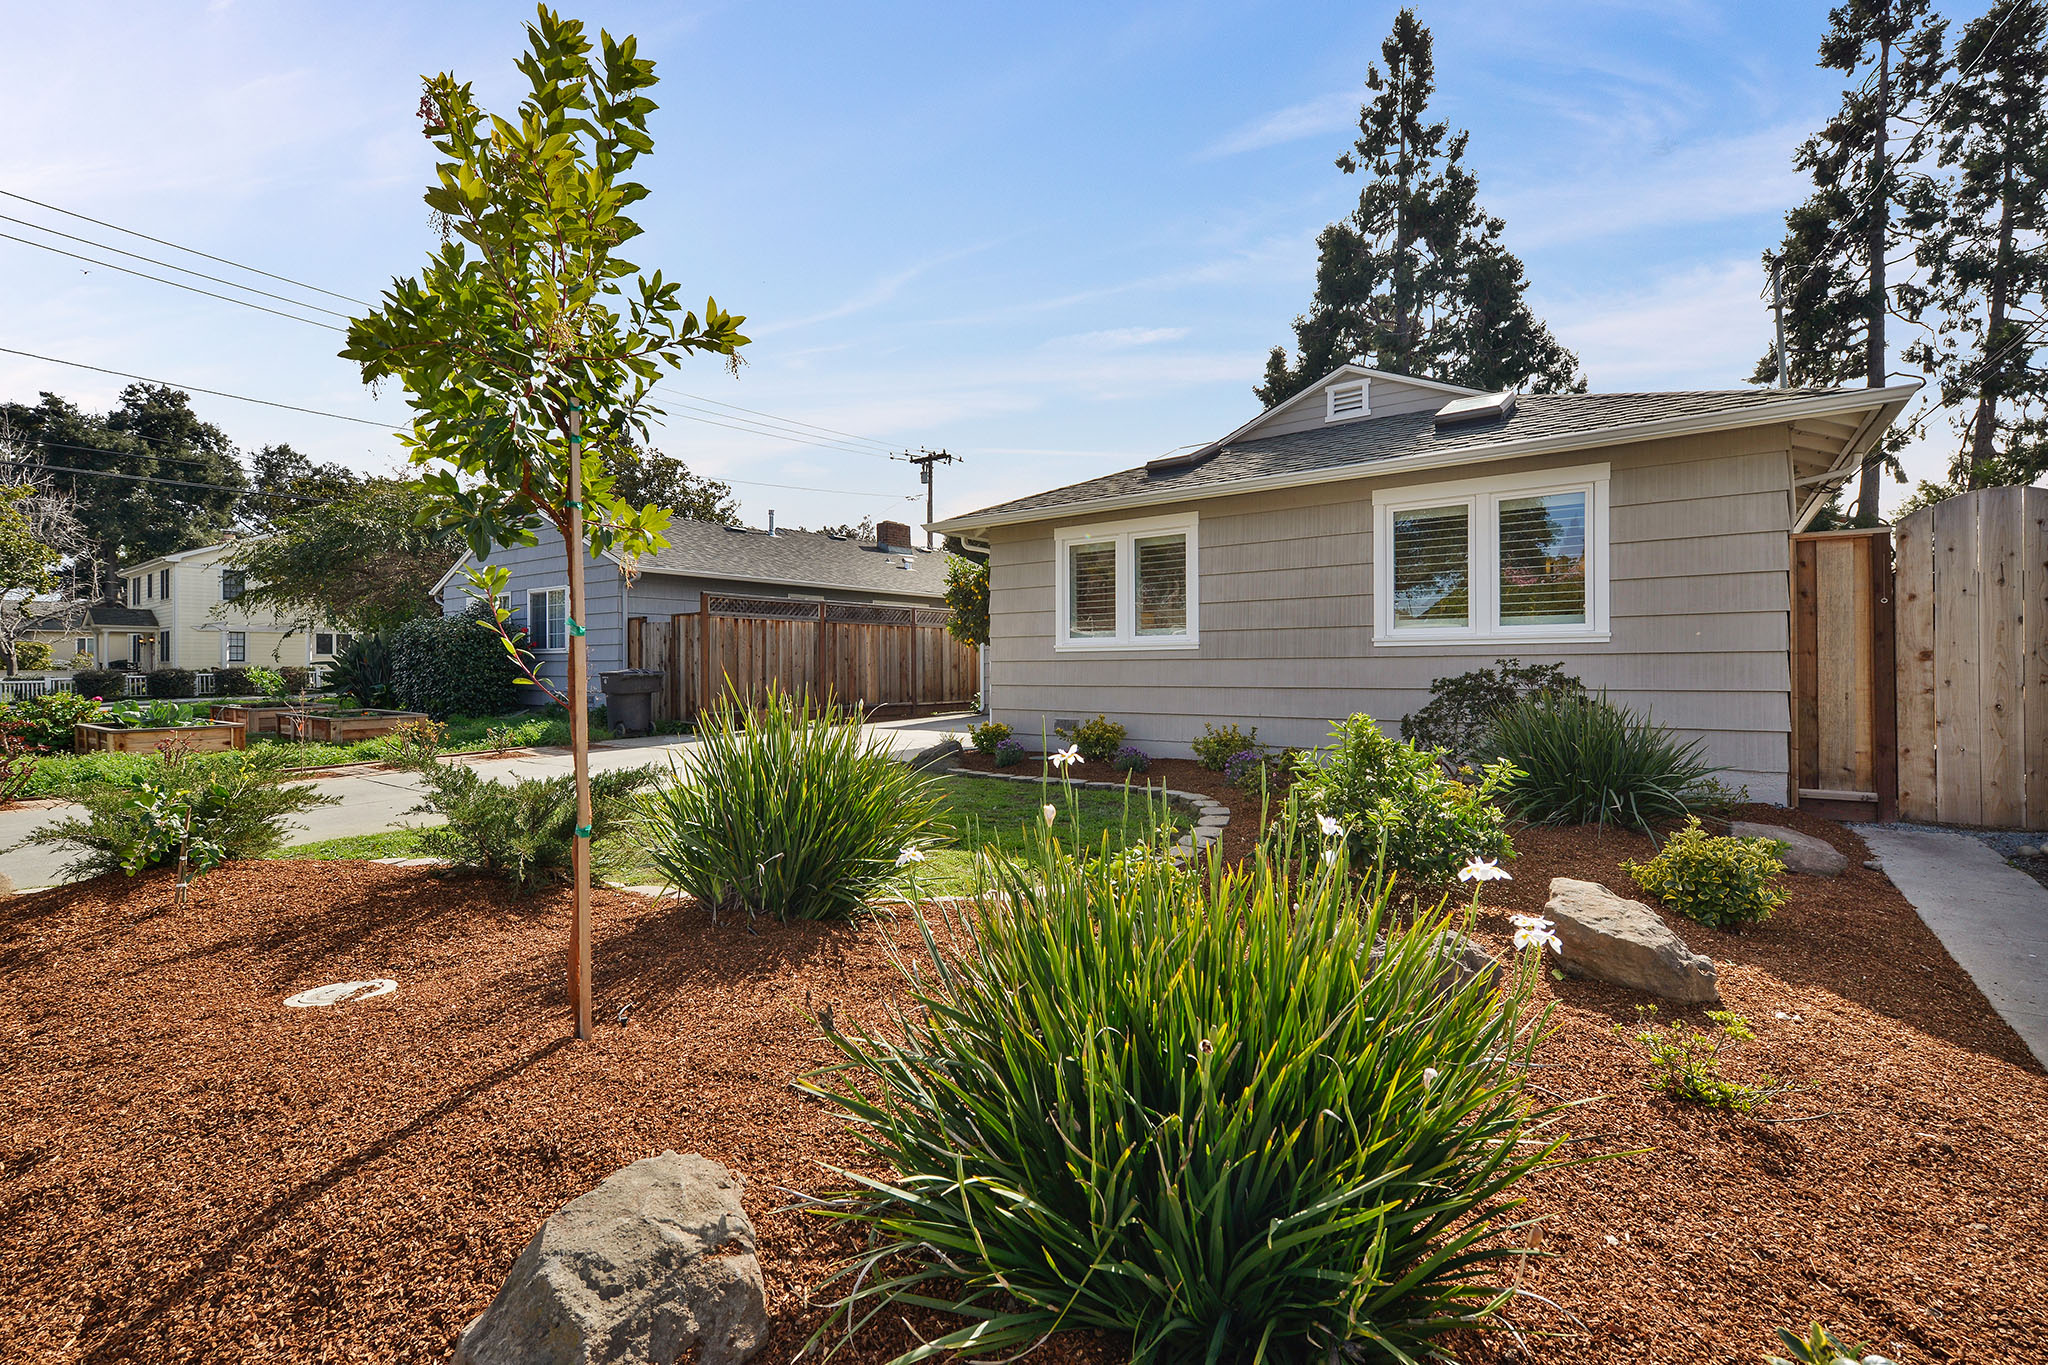 Image number 1 for slideshow of 223 Vincent Drive | Mountain View, CA 94041 |